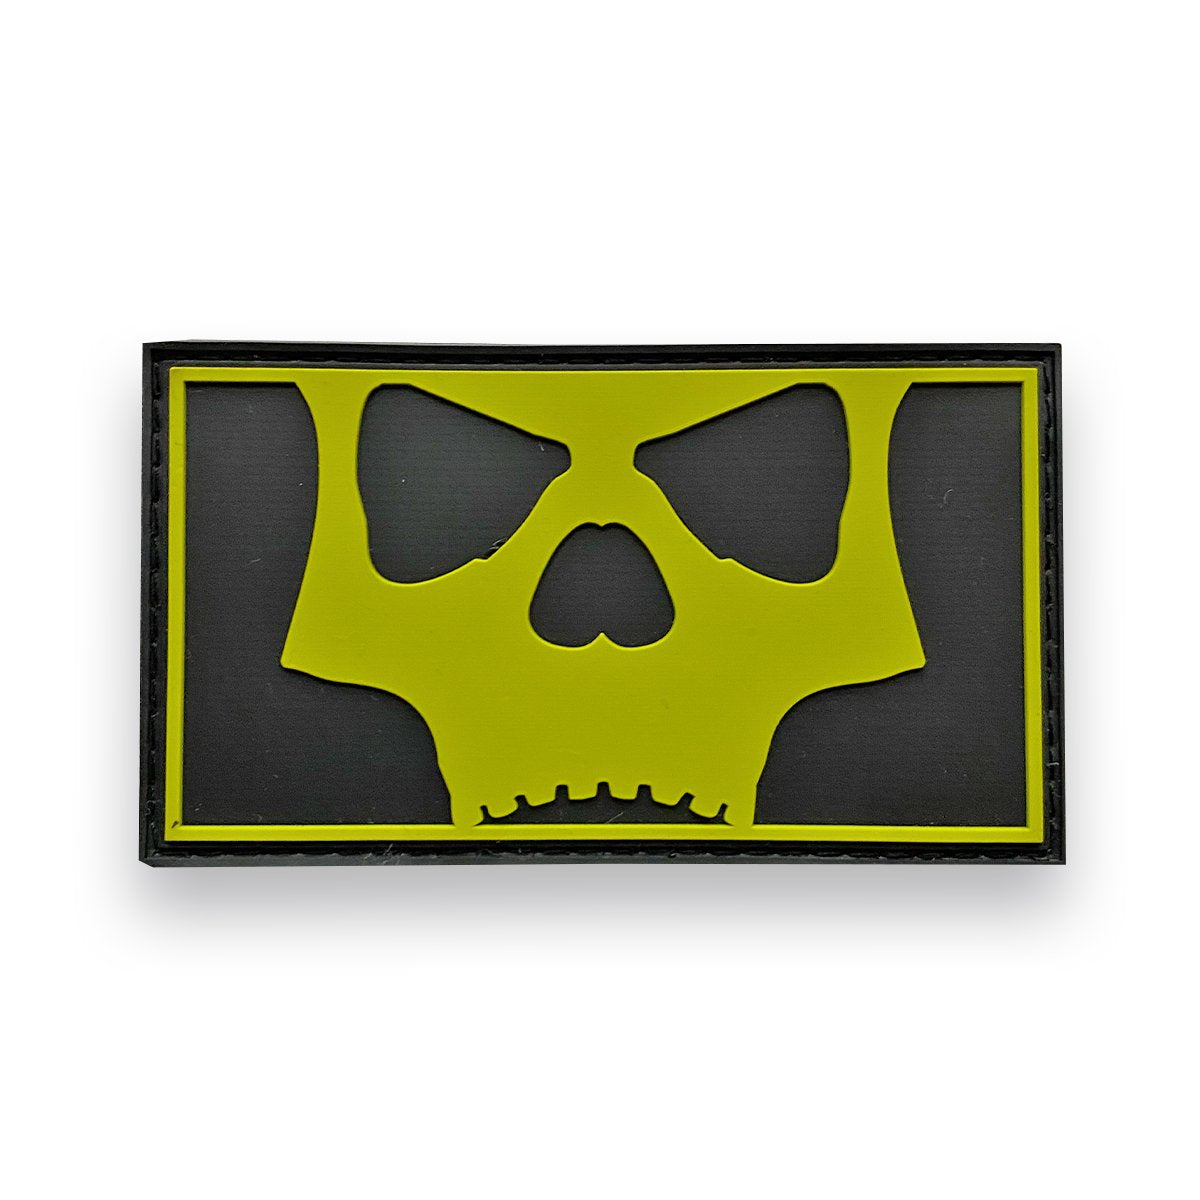 Infamous Paintball "Icon Skull" Full Style Patch - Black Volt